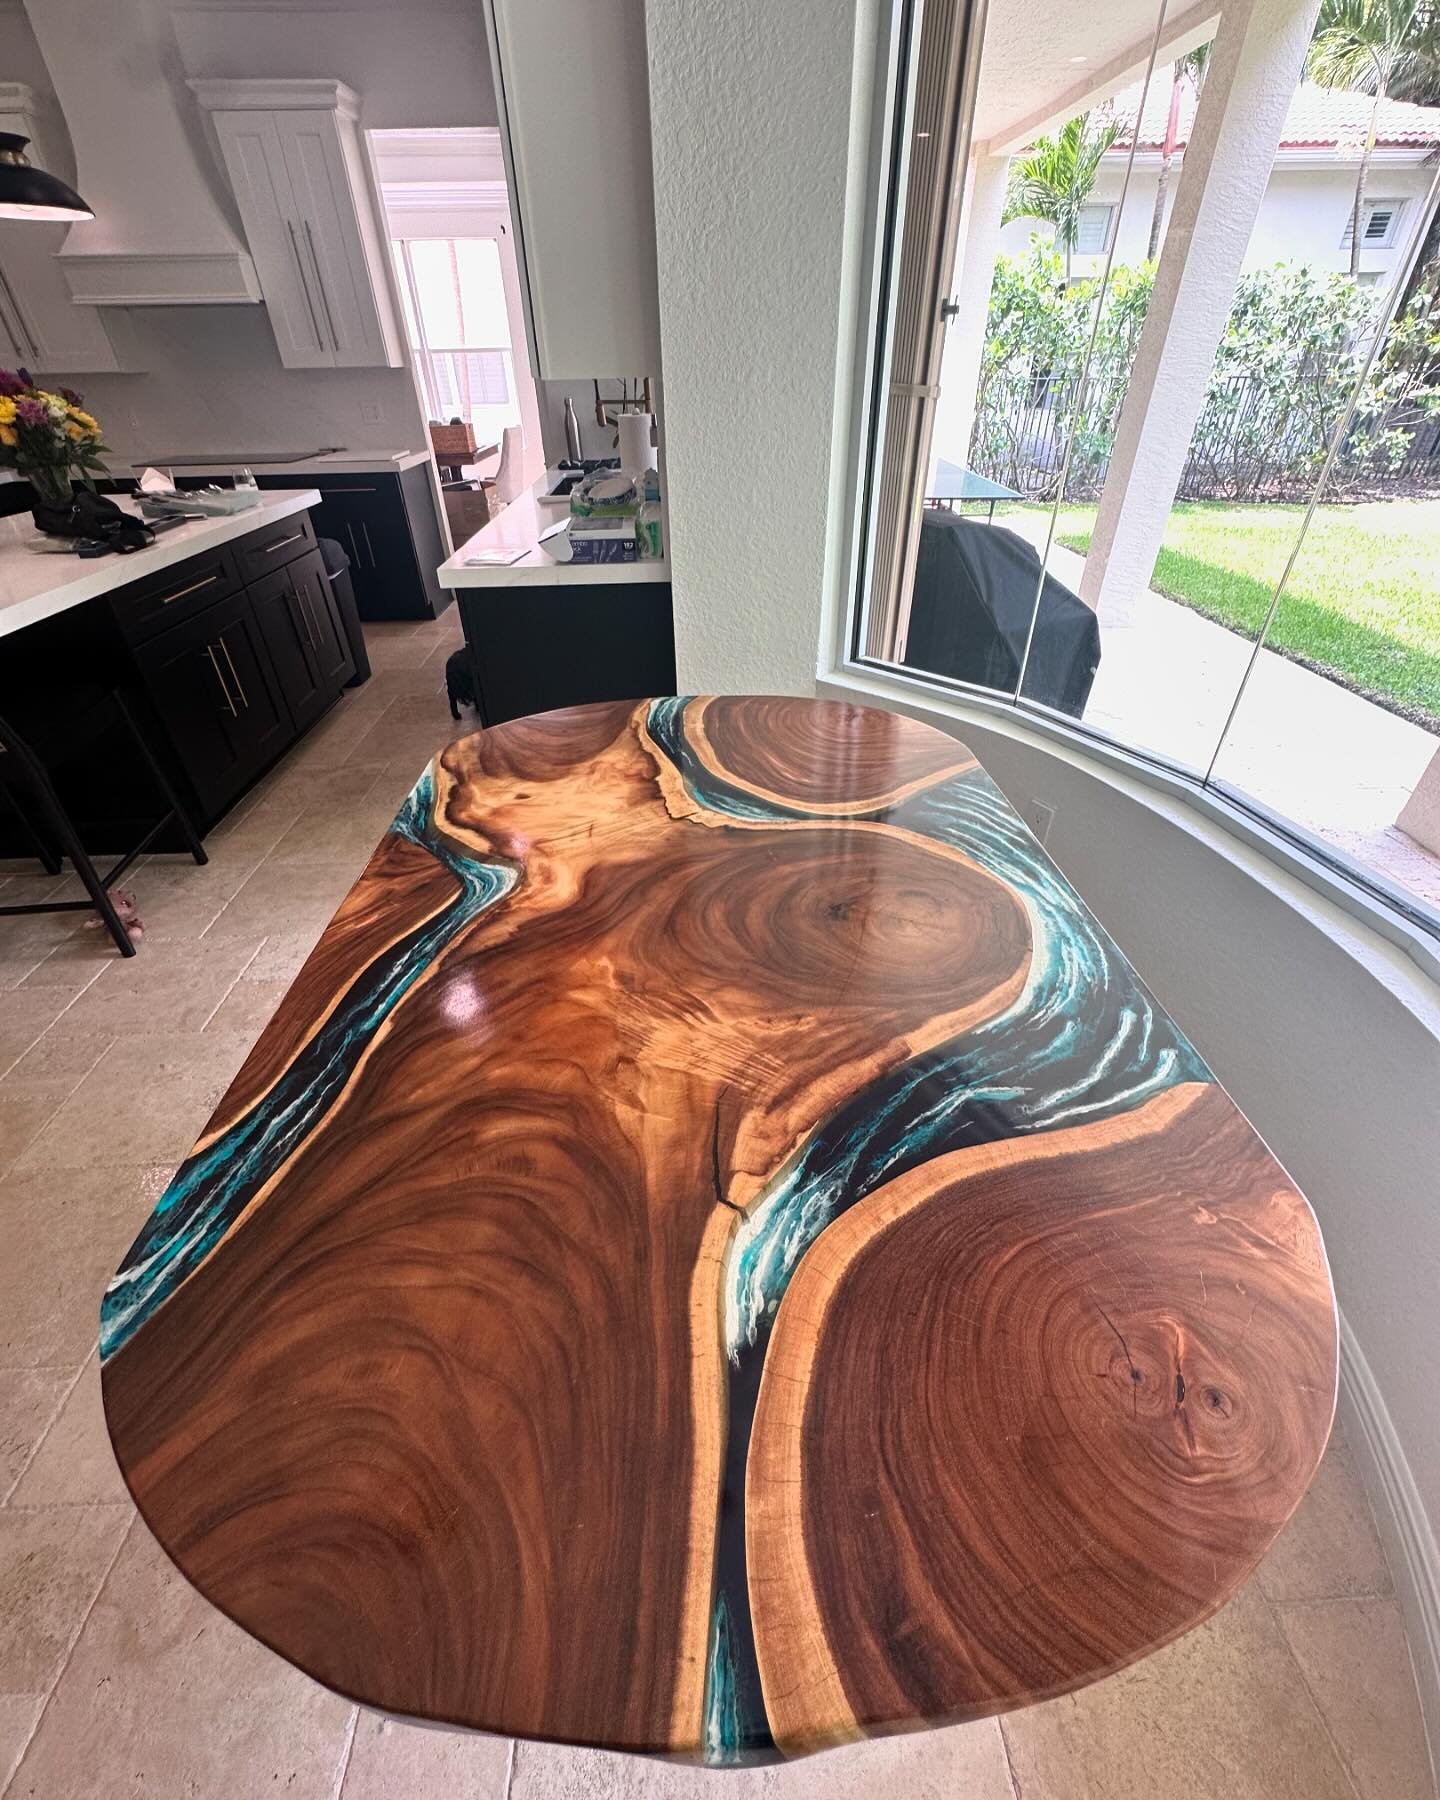 An oval dining table that will leave you speechless! This stunning piece is a masterful fusion of elegance and coastal charm. Where memories are made and treasured.
#waves #Beach #Oceantheme #diningroom #diningtable #liveedge #custom #diningtabledesi